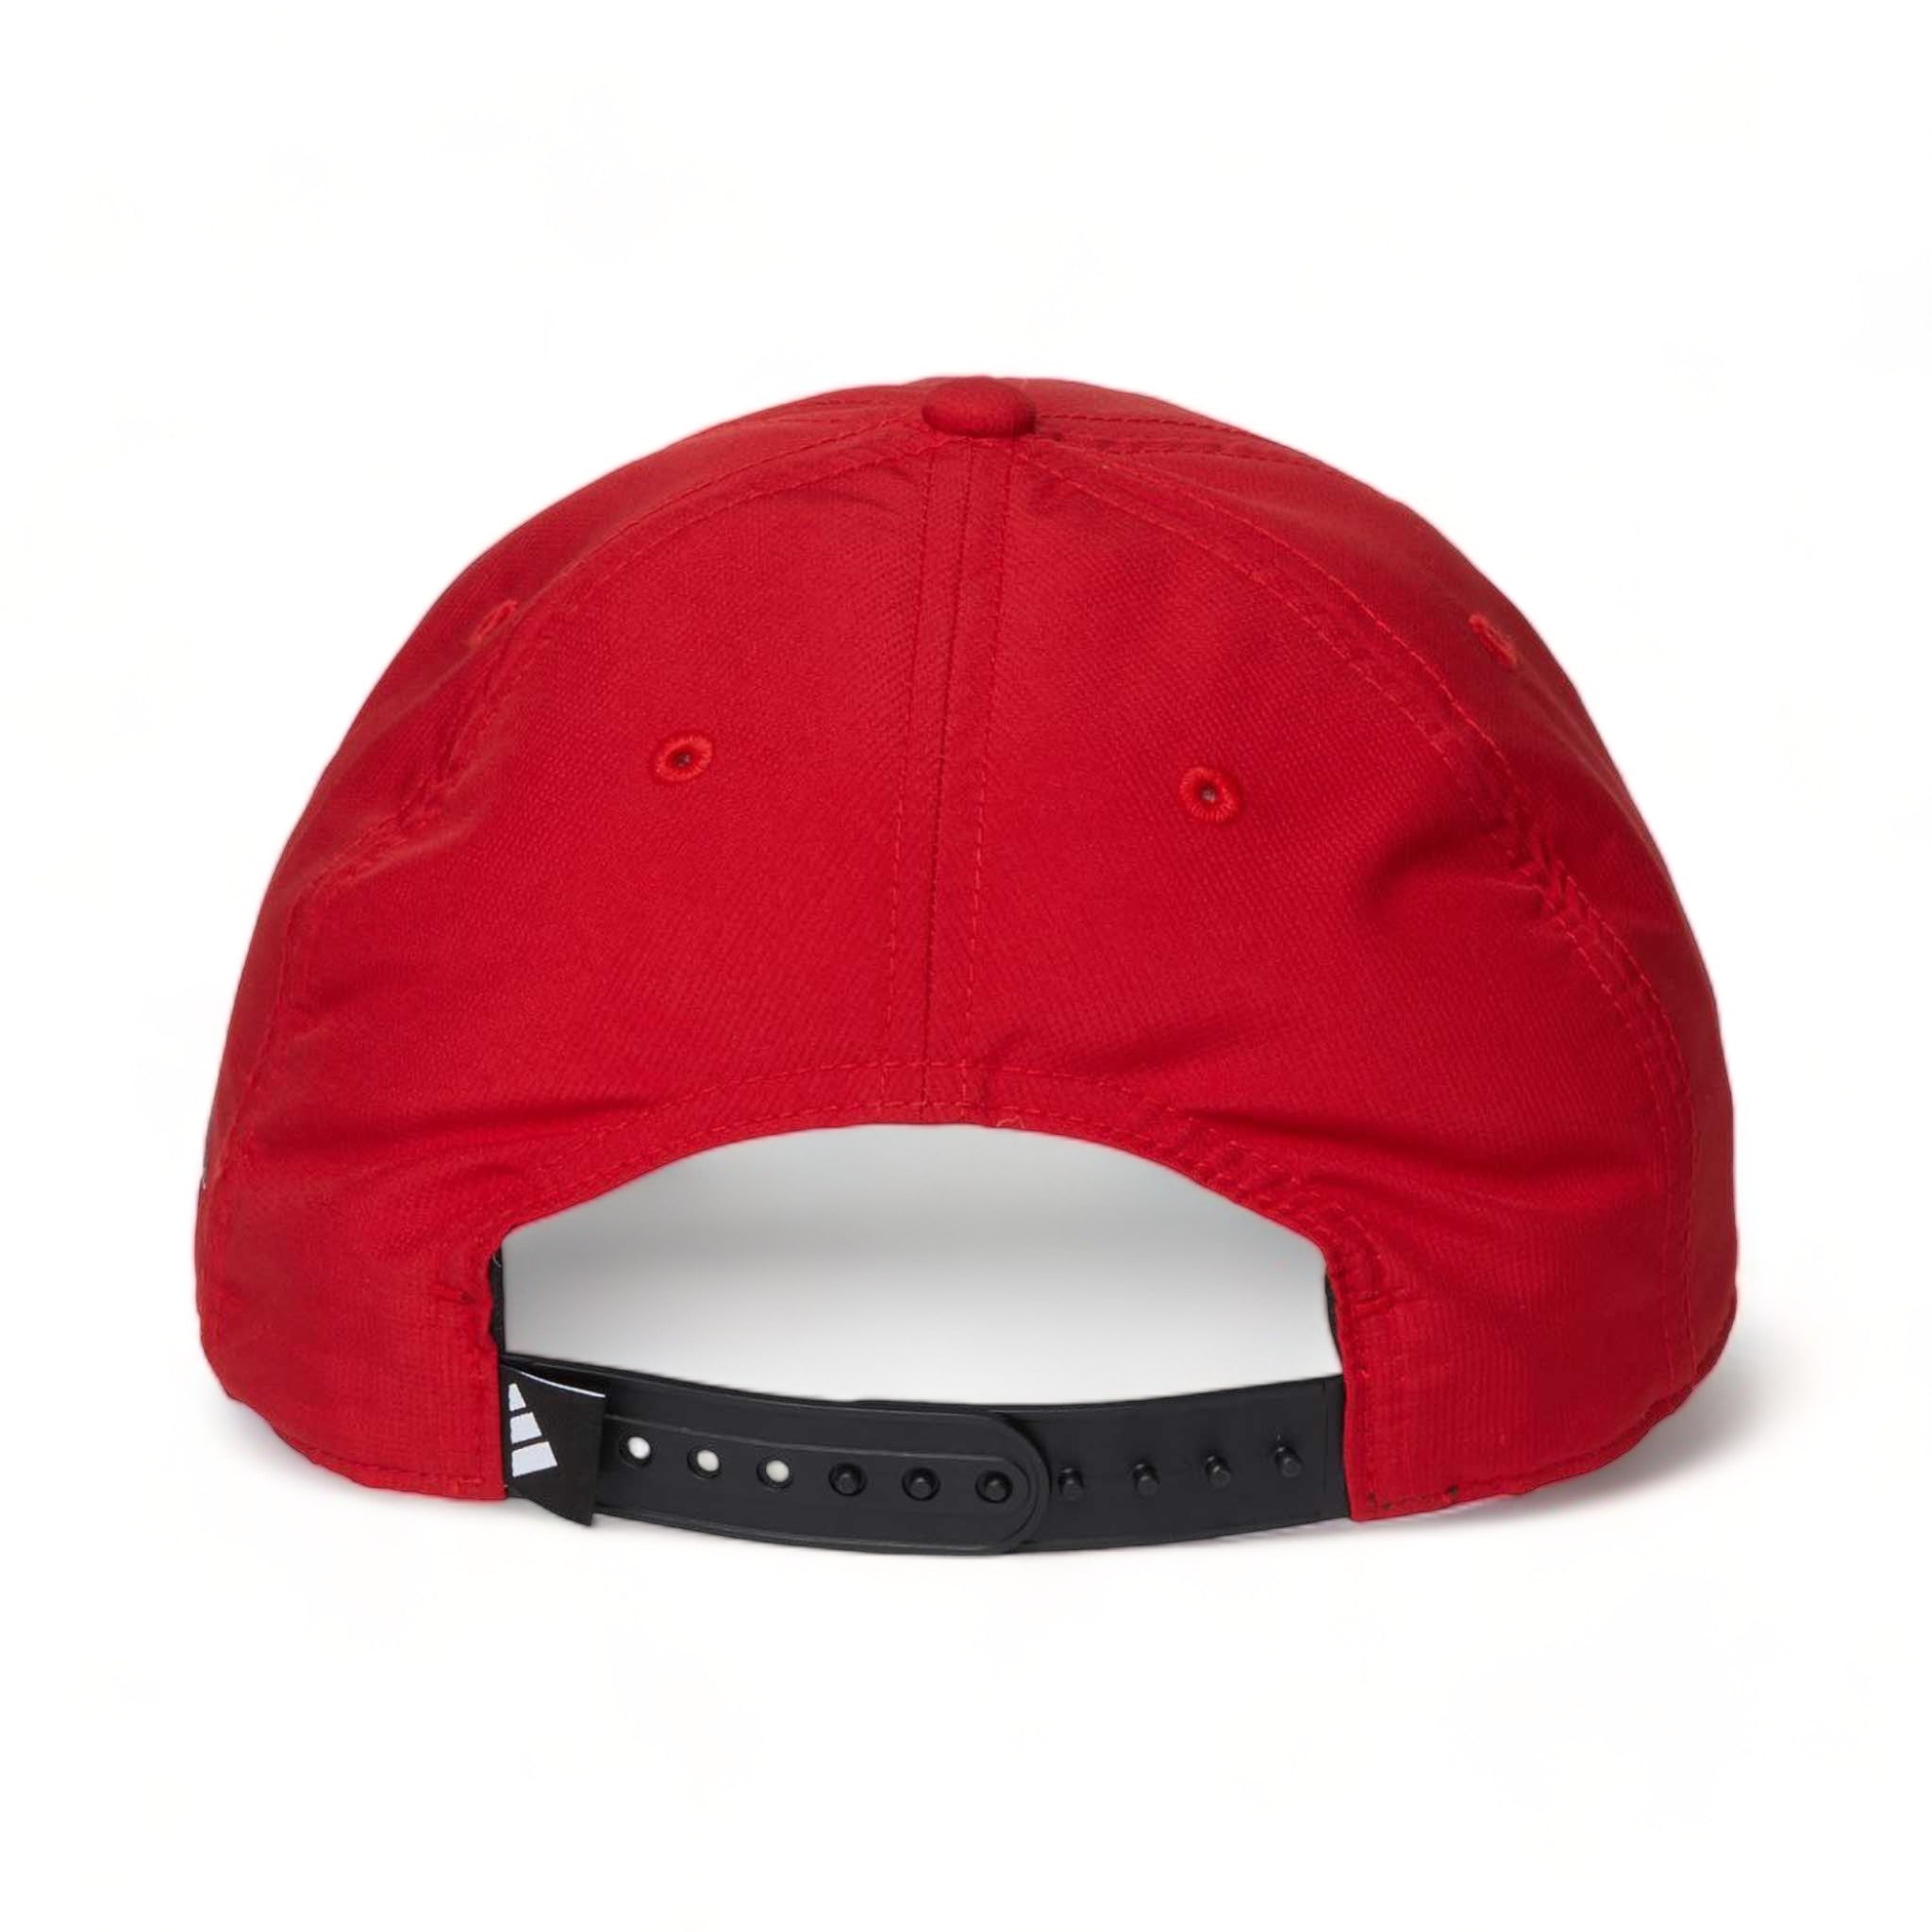 Back view of Adidas A600S custom hat in power red